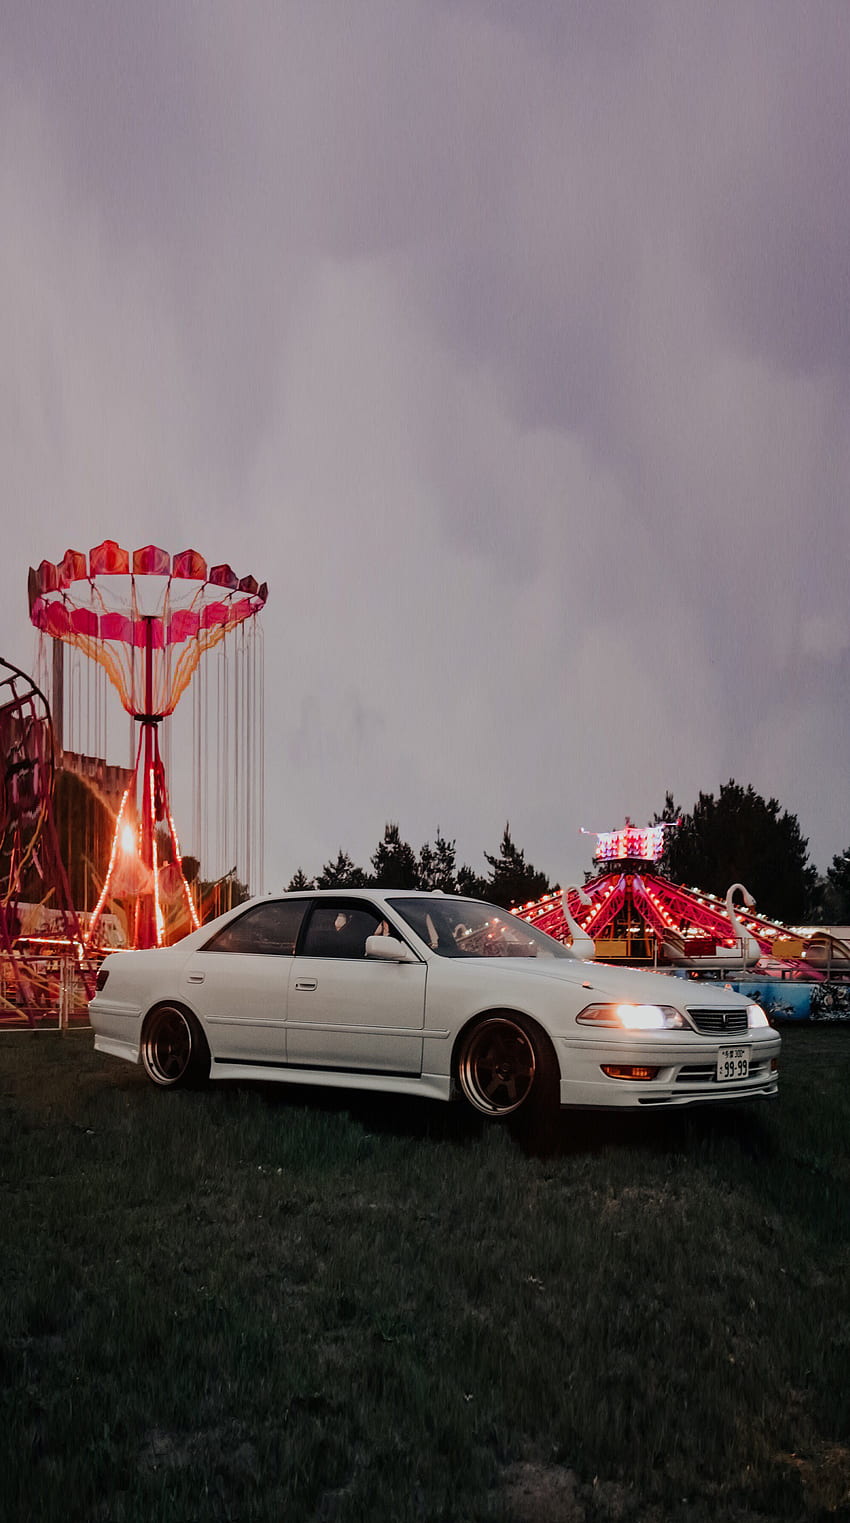 Toyota Chaser Jzx Jdm Fire Water Car El Tony Toyota Chaser Hd Pxfuel